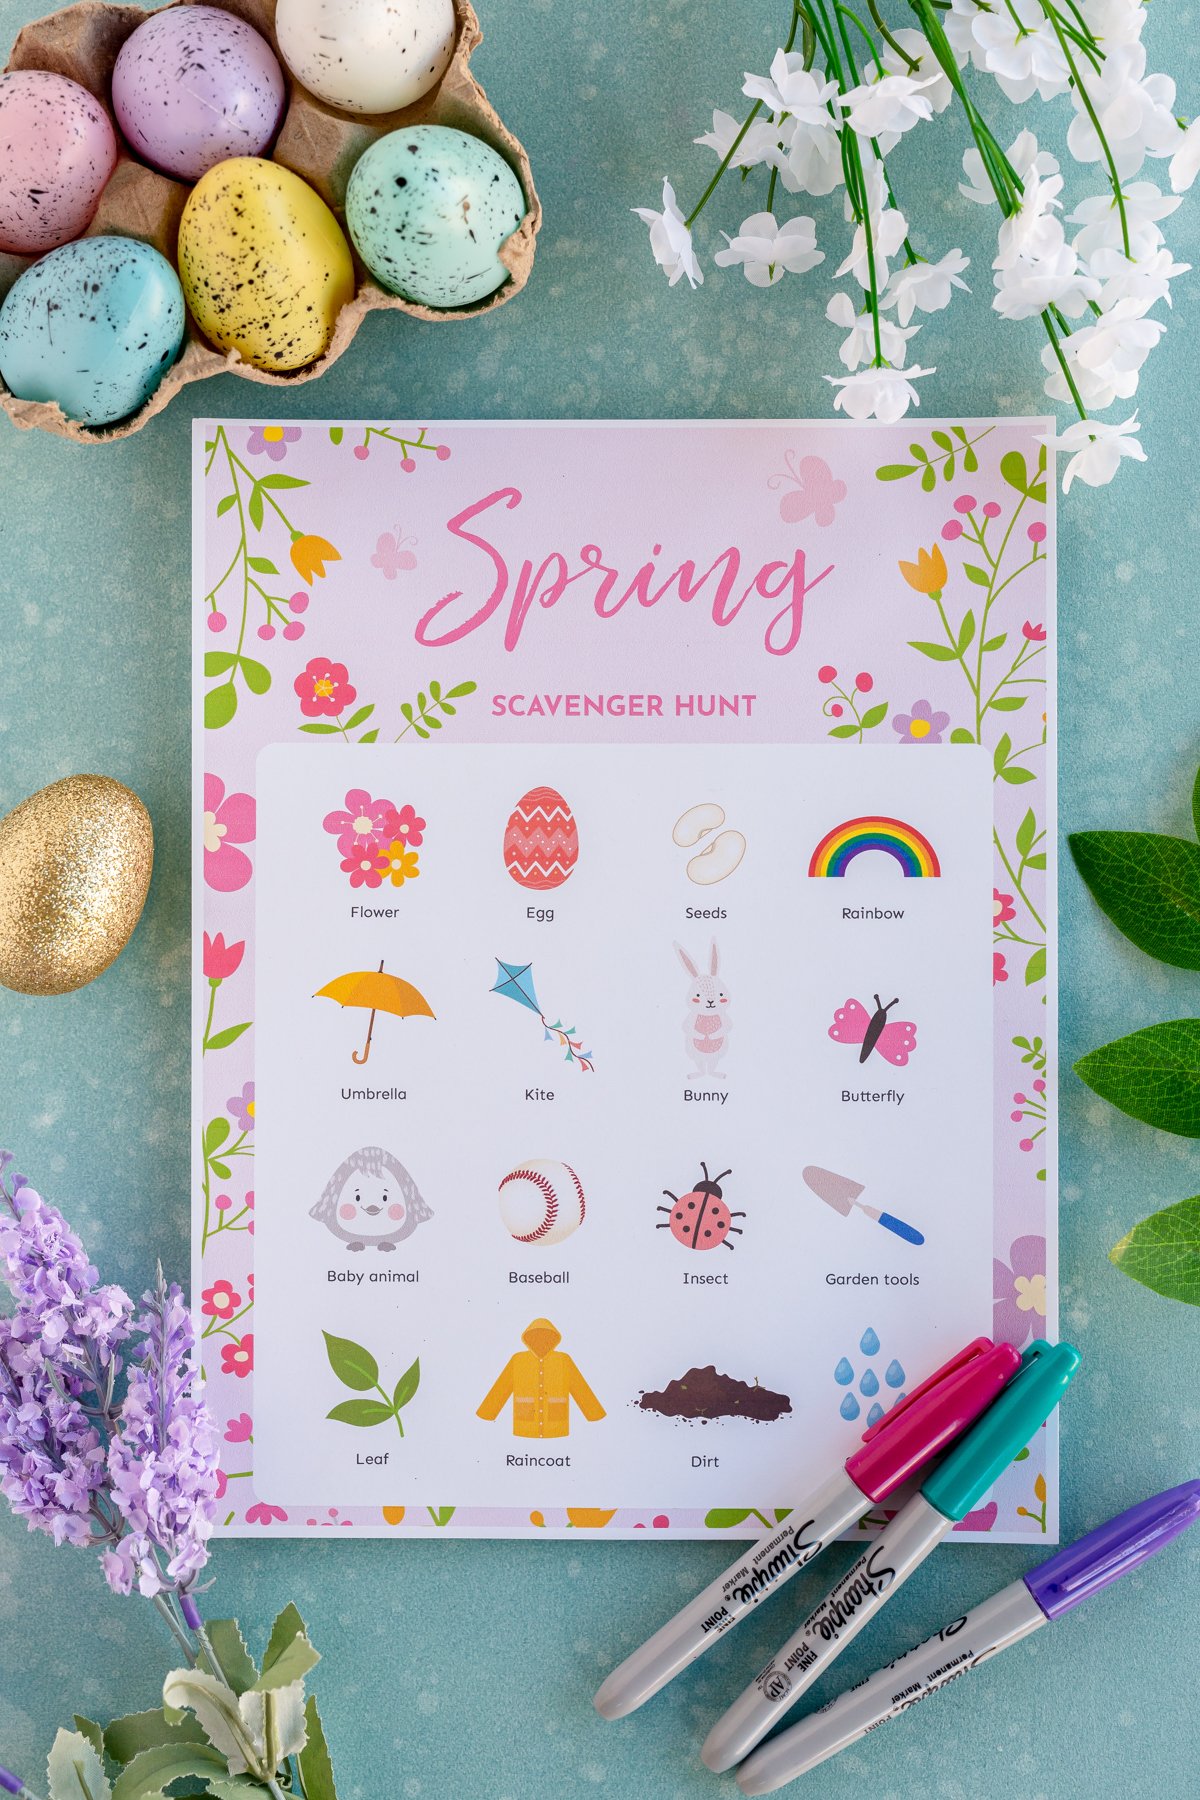 spring scavenger hunt with pictures